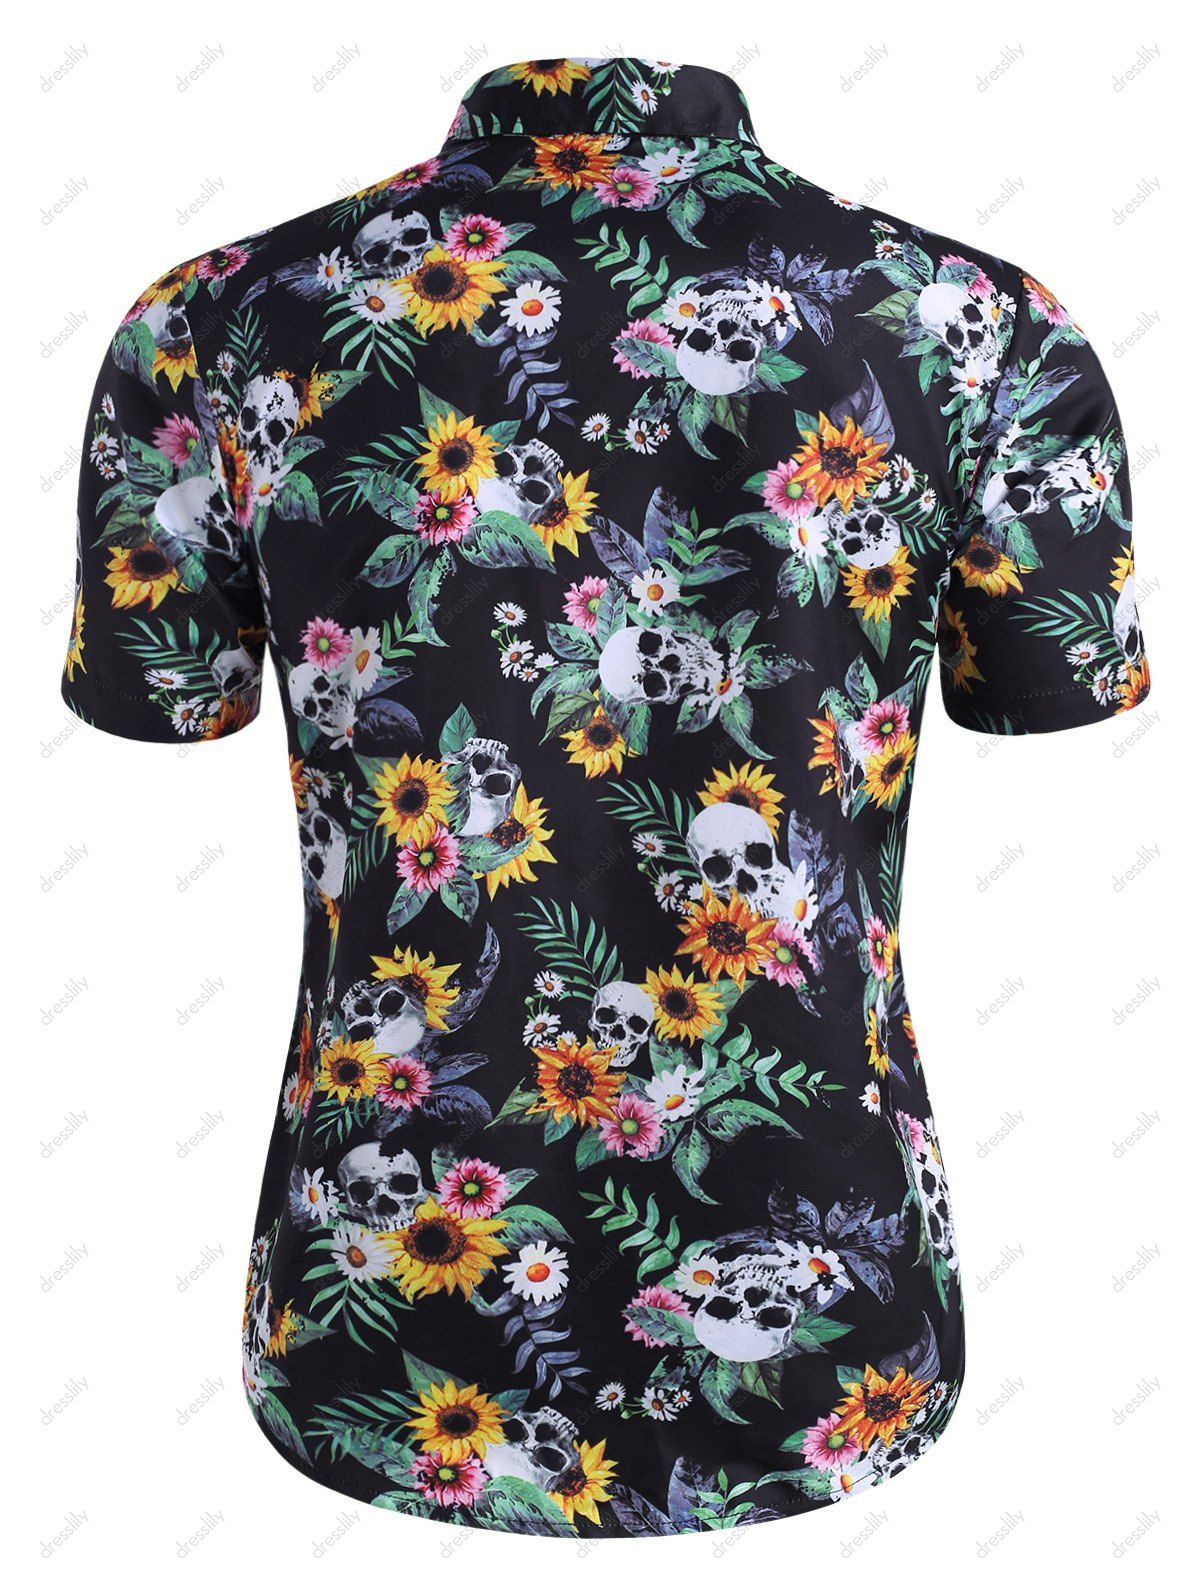 [79% OFF] 2021 Skull Ditsy Floral Button Up Casual Shirt In Multicolor ...